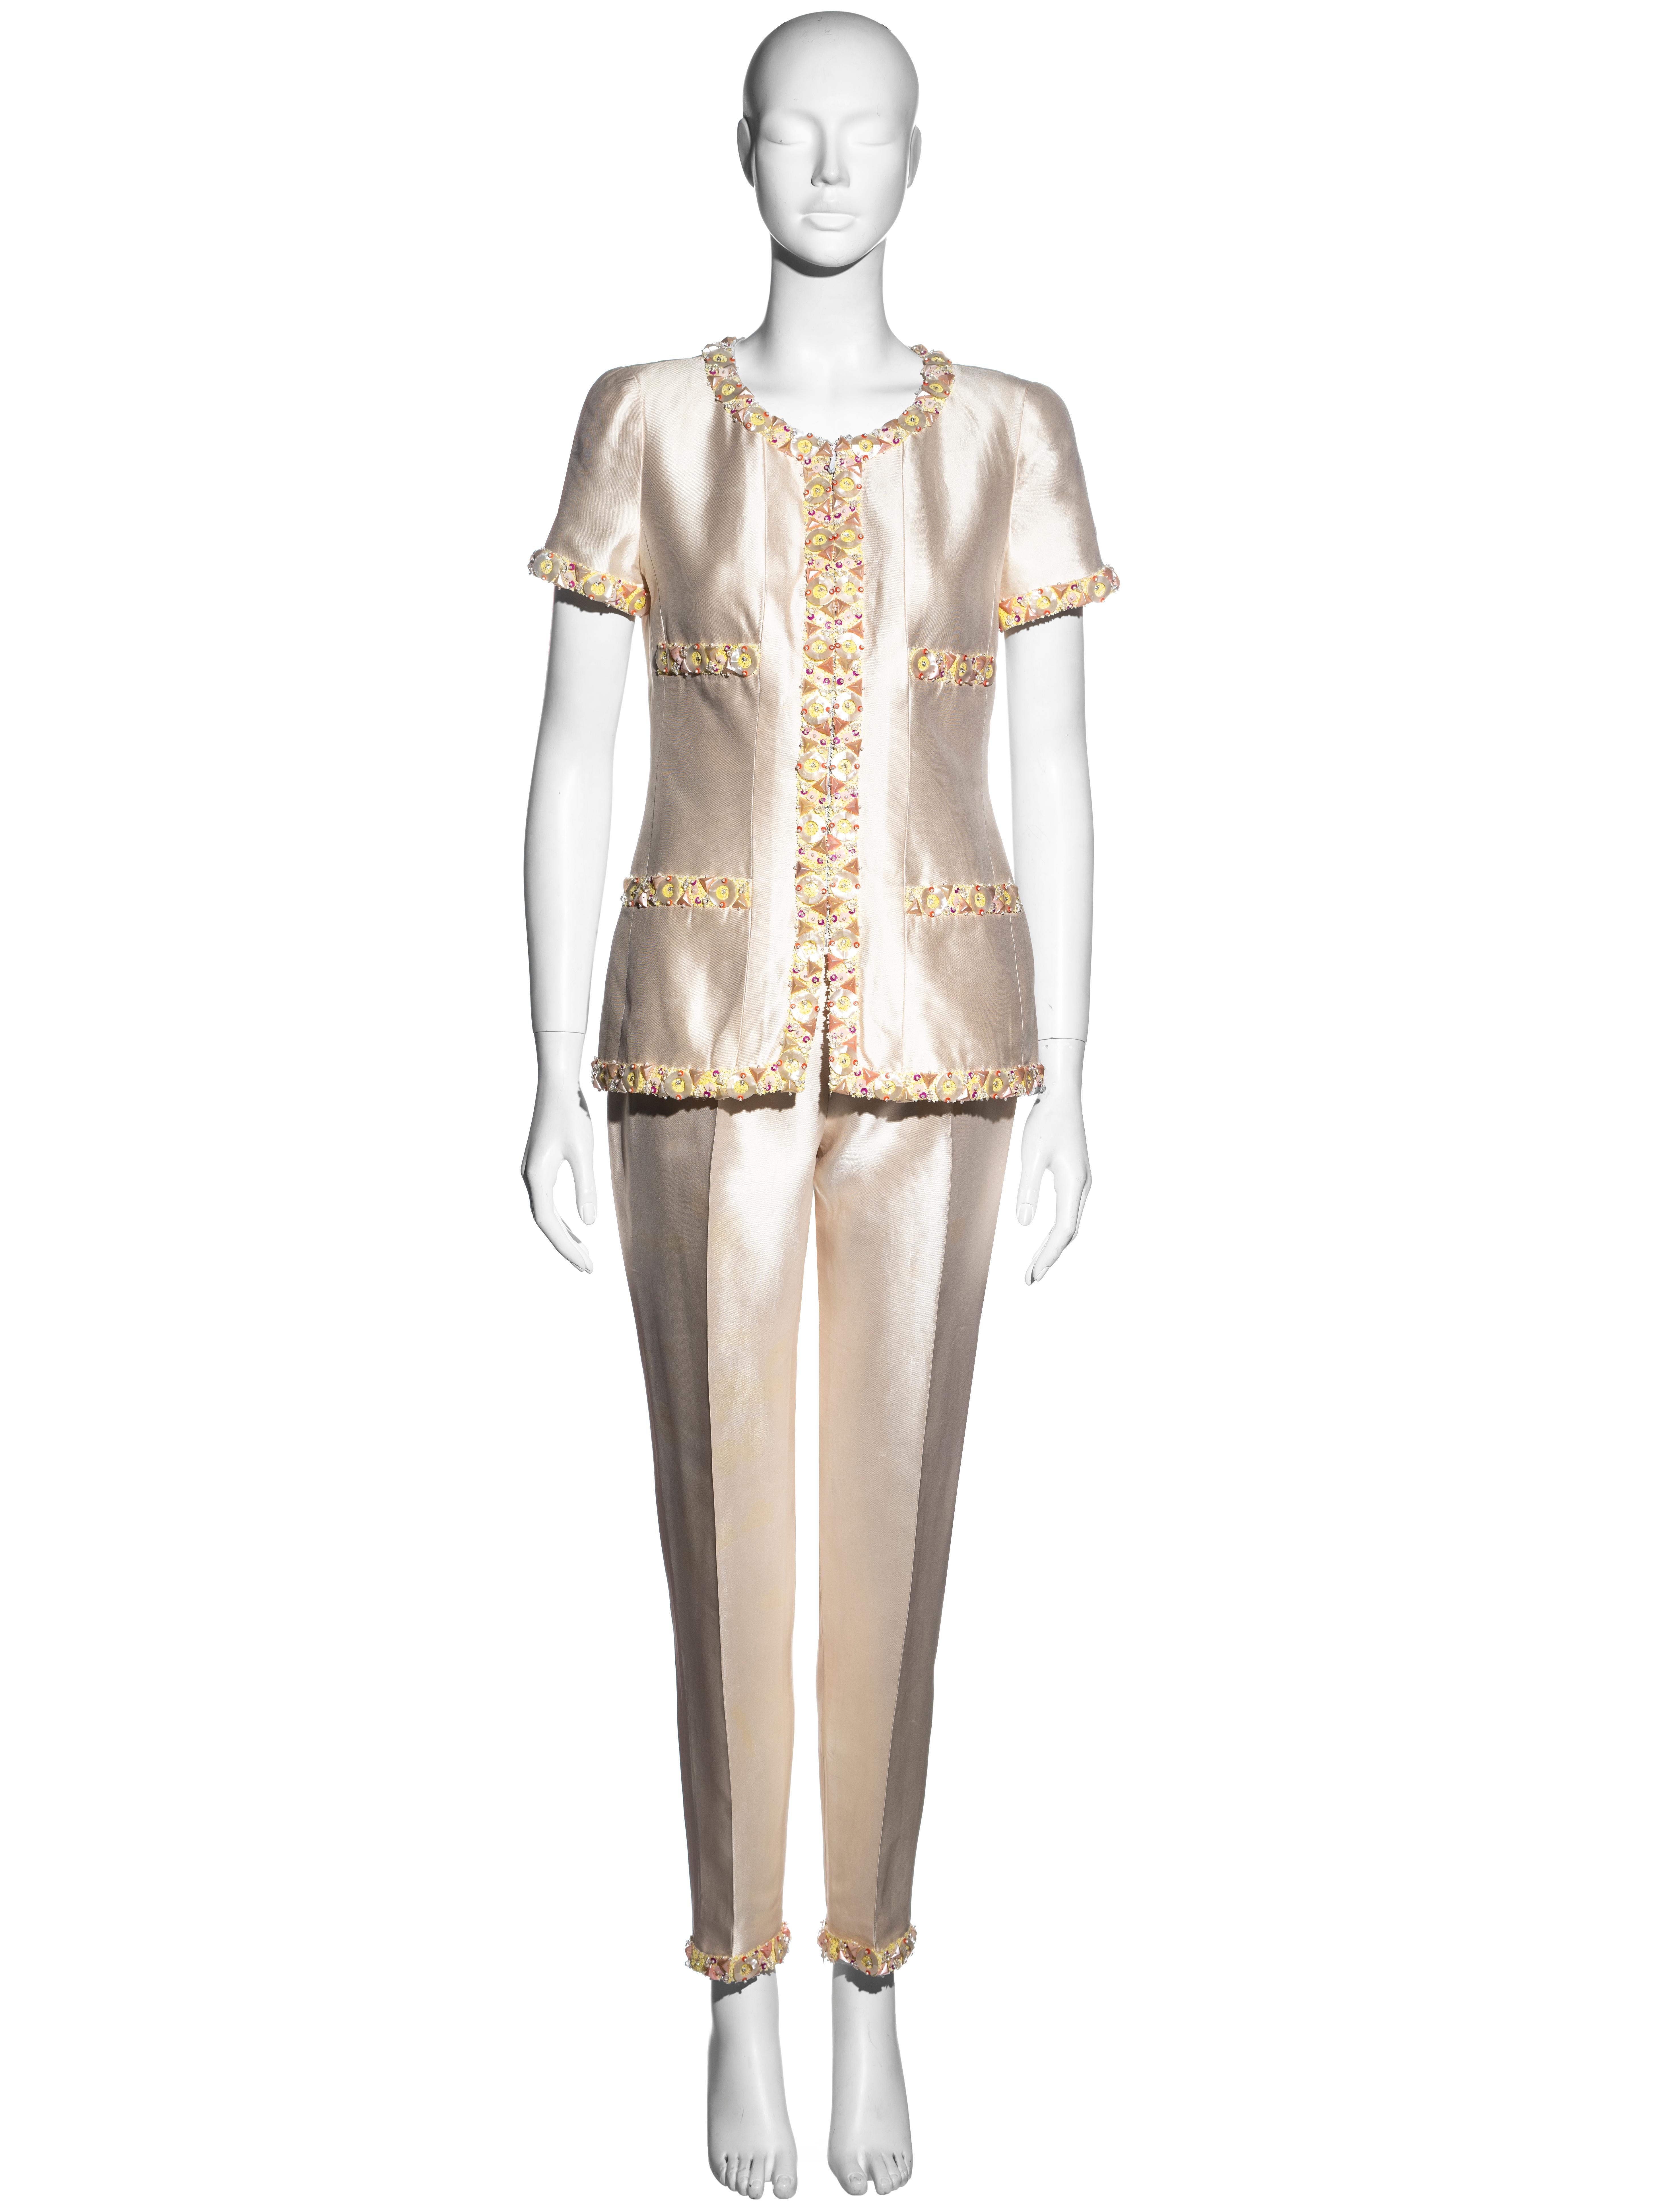 ▪ Chanel ivory silk evening pantsuit
▪ Designed by Karl Lagerfeld
▪ Short sleeve jacket with front zip fastening
▪ Embellished trim with yellow and pink sequined florals
▪ Matching straight-leg pants with ankle zips 
▪ FR 40 - UK 12 - US 8
▪